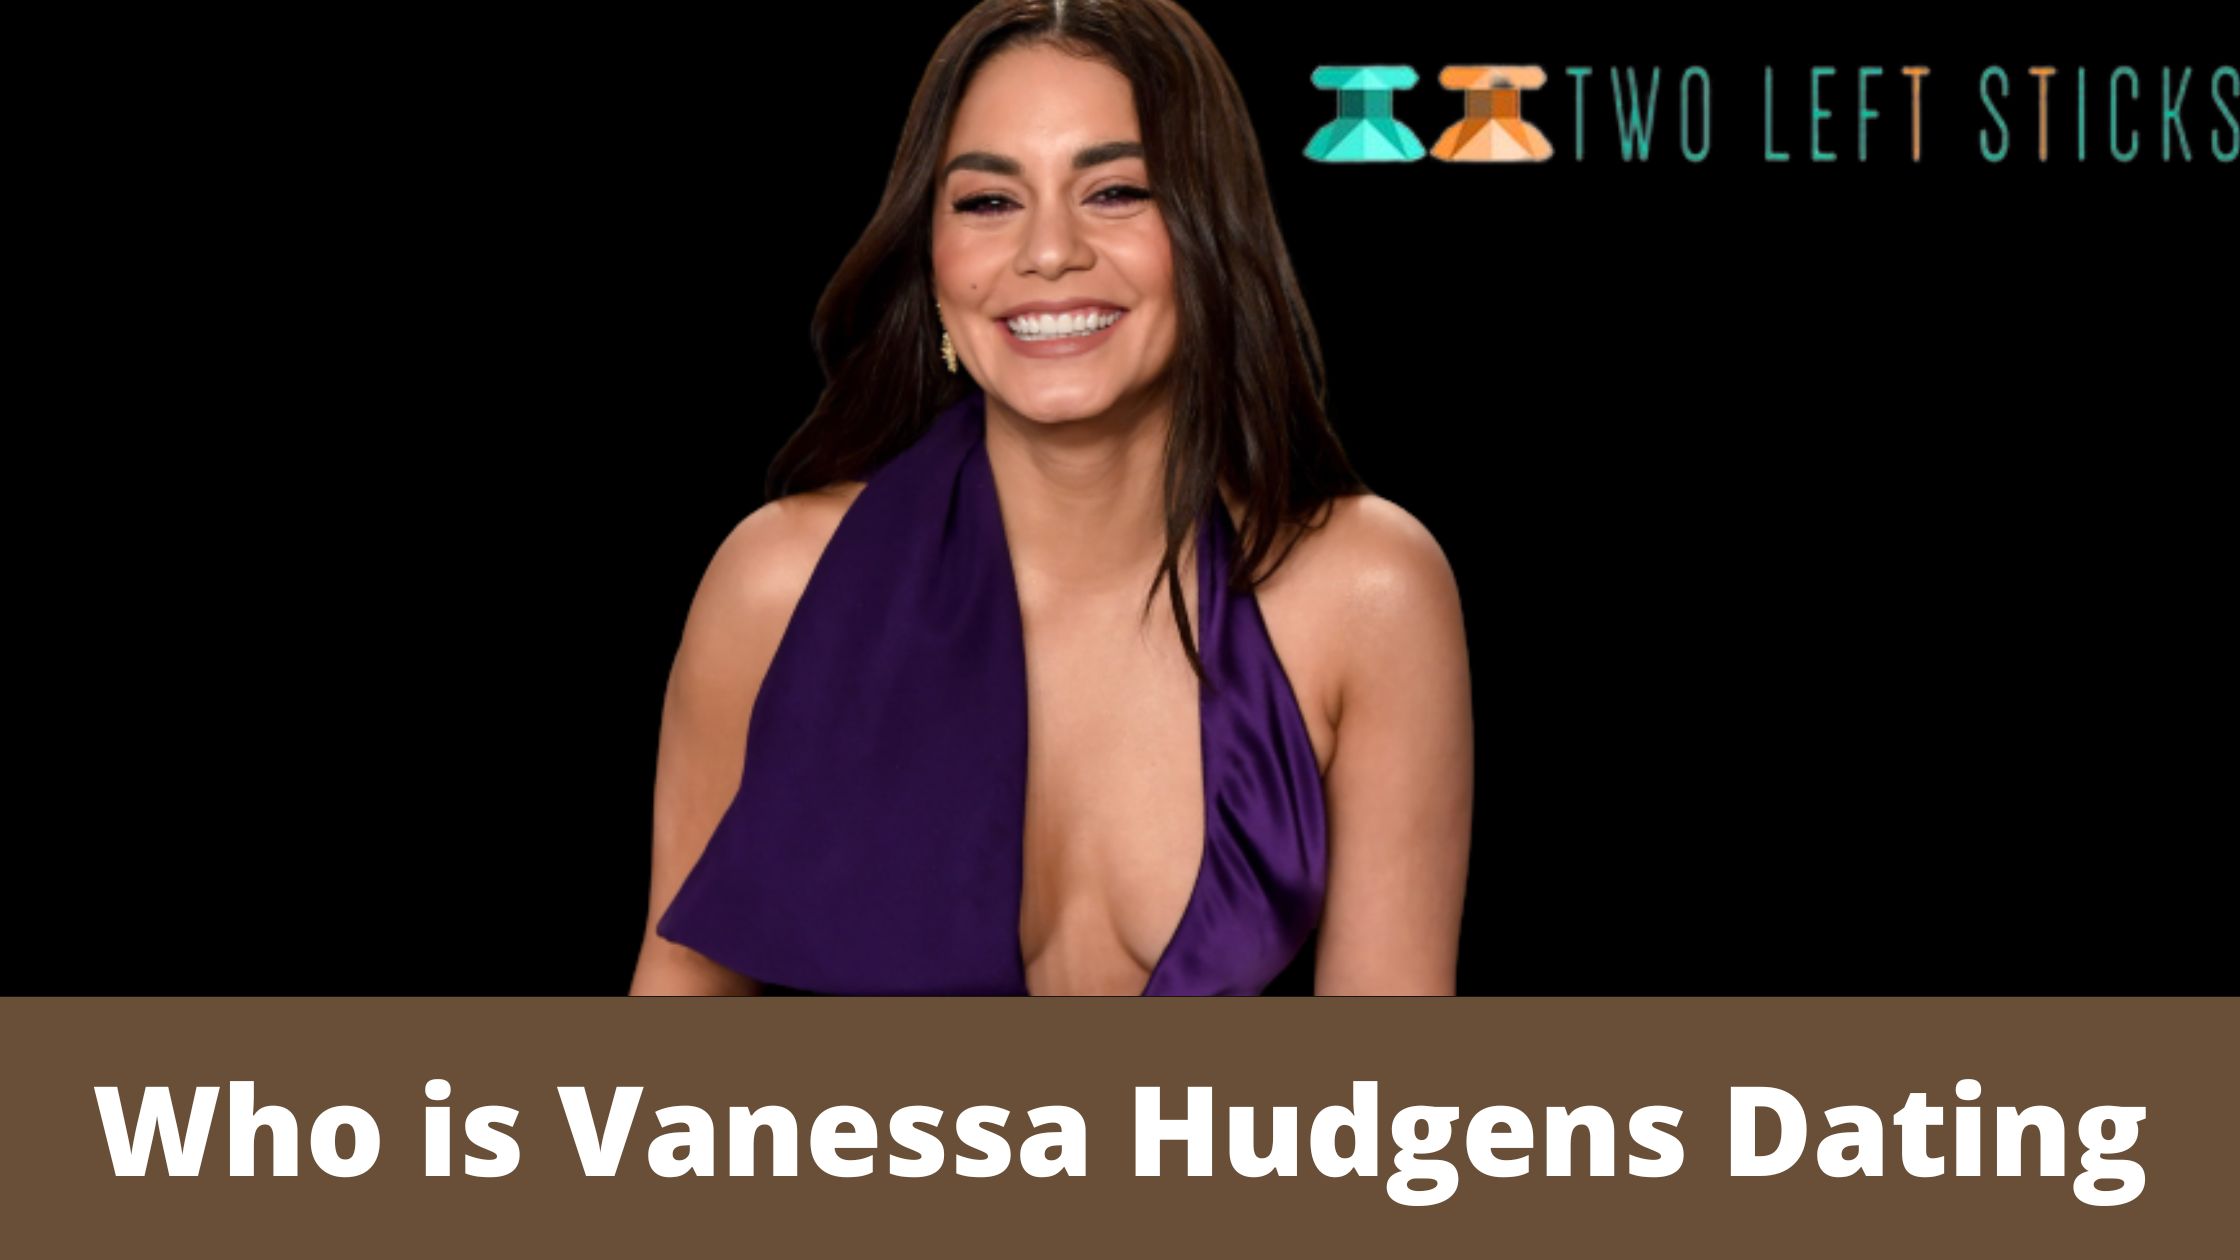 Vanessa Hudgens Dating- A Timeline of Her and Austin Butler’s Love Story!